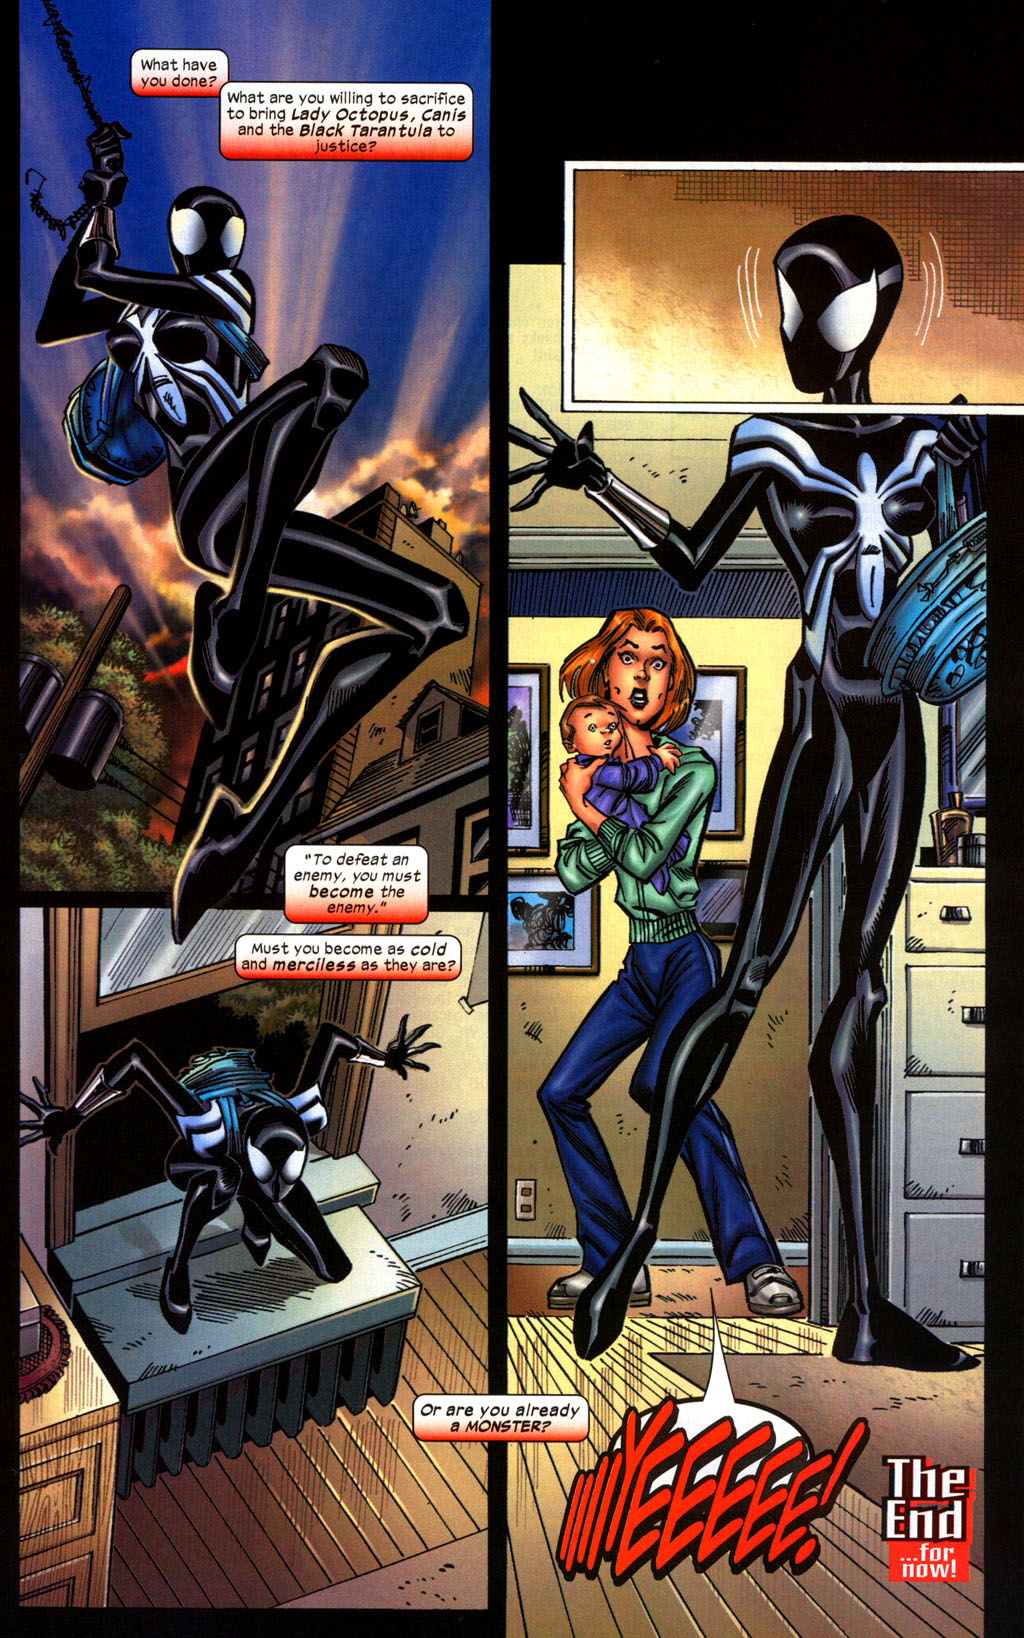 Black Suited Spider-Girl from Spider-Girl issue #75 mod is now